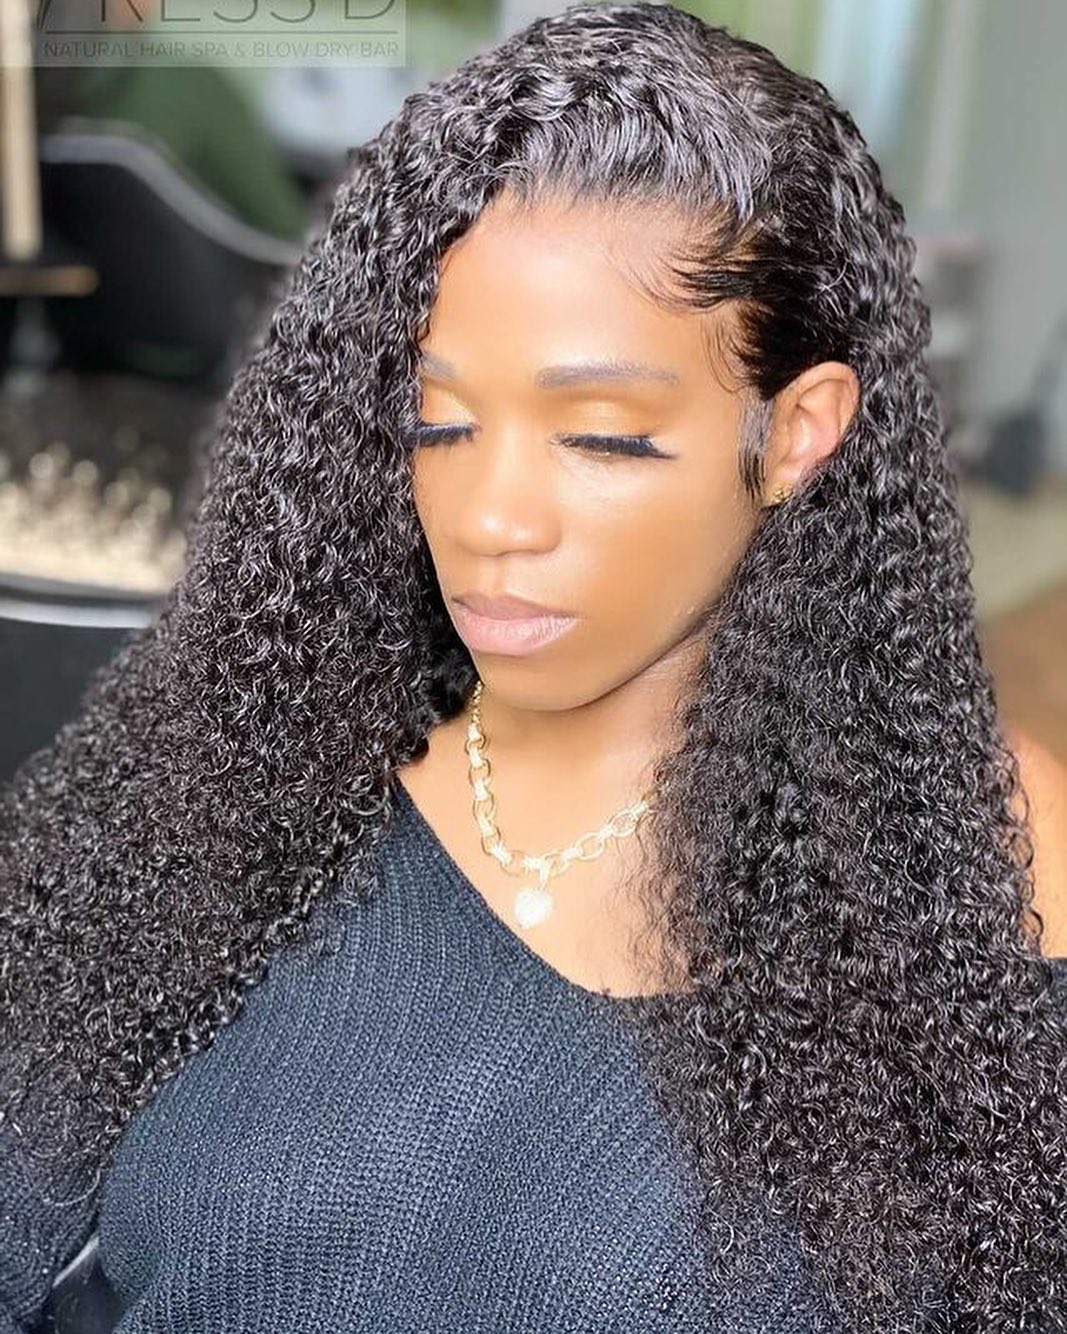 Brazilian Kinky Curly Bundles With 360 Lace Frontal 10A Grade 100% Human Virgin Hair Bling Hair